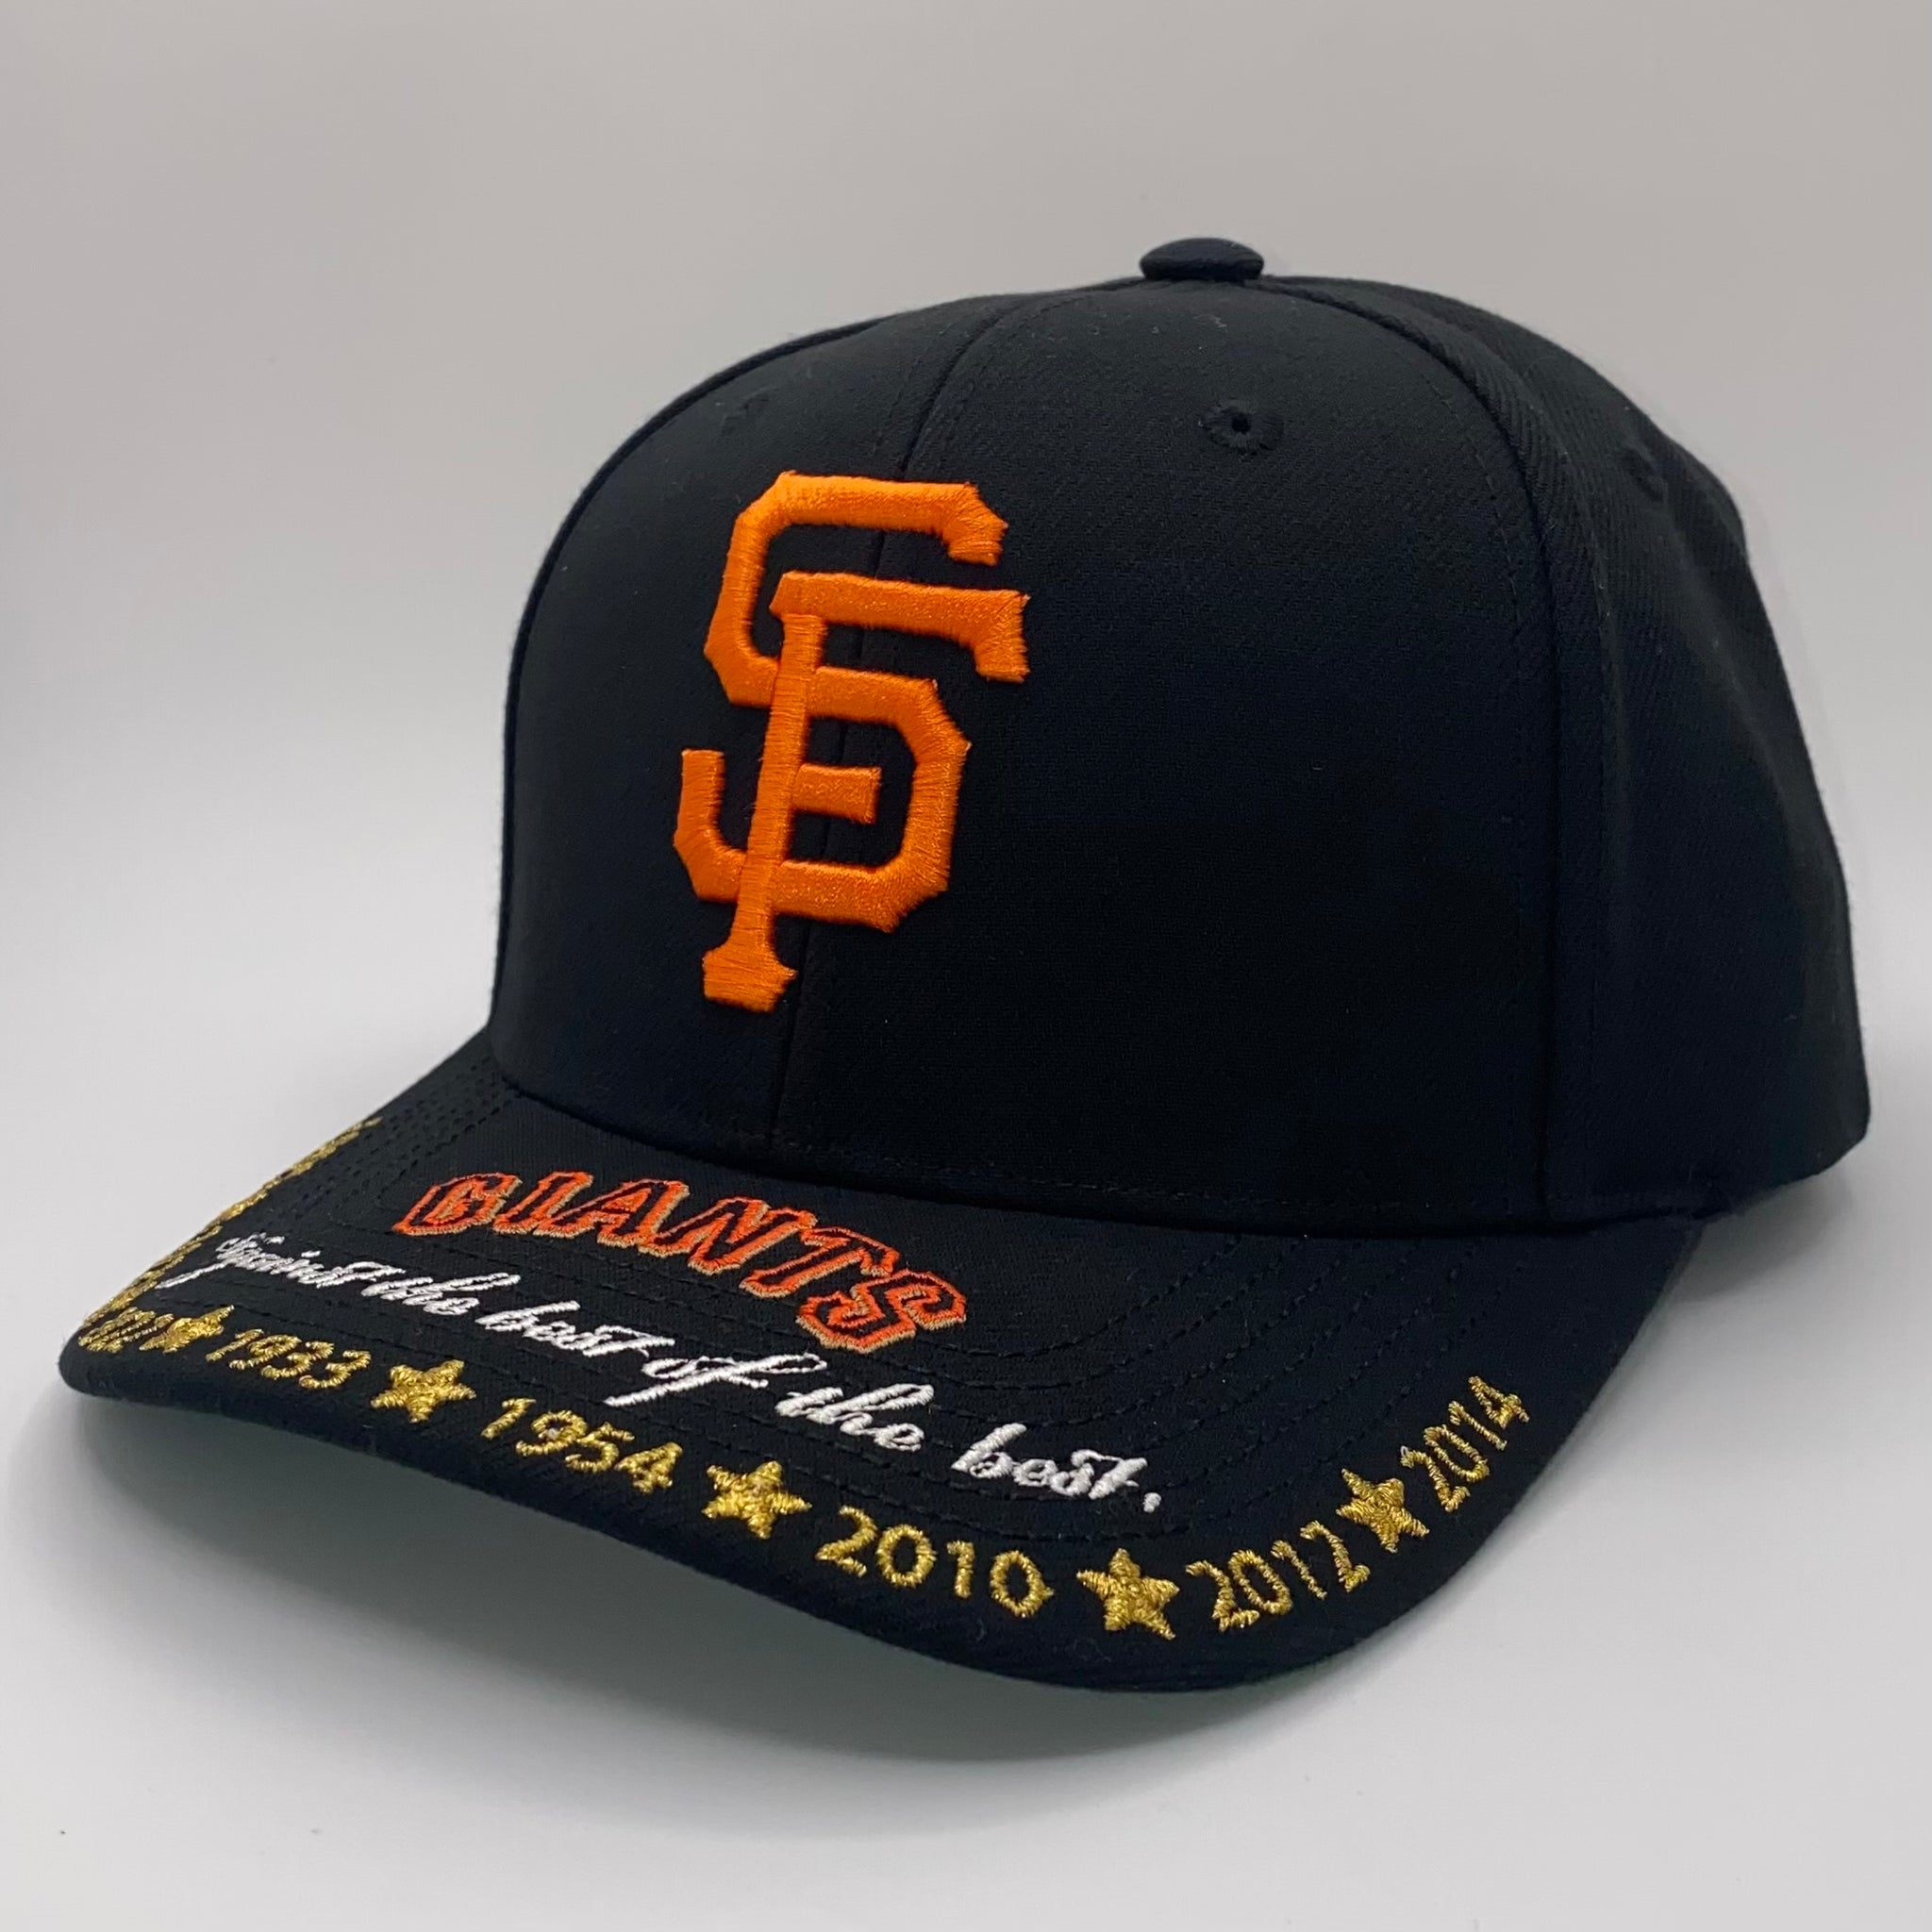 San Francisco Giants "Against the Best of the Best" Snapback Hat